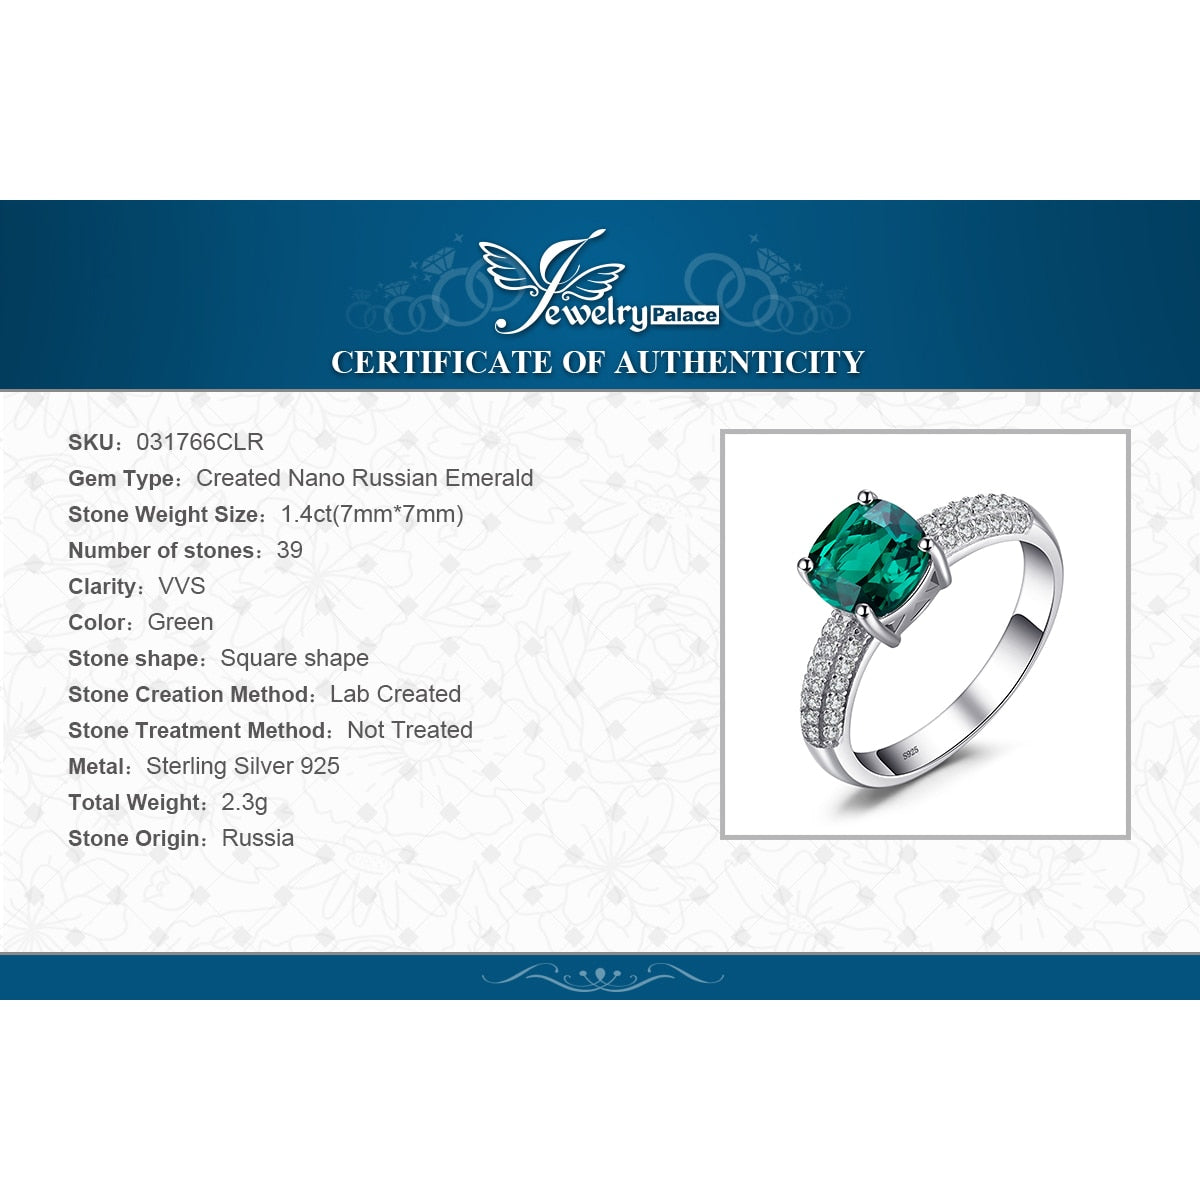 Gemstone Solitaire Engagement Rings for Women